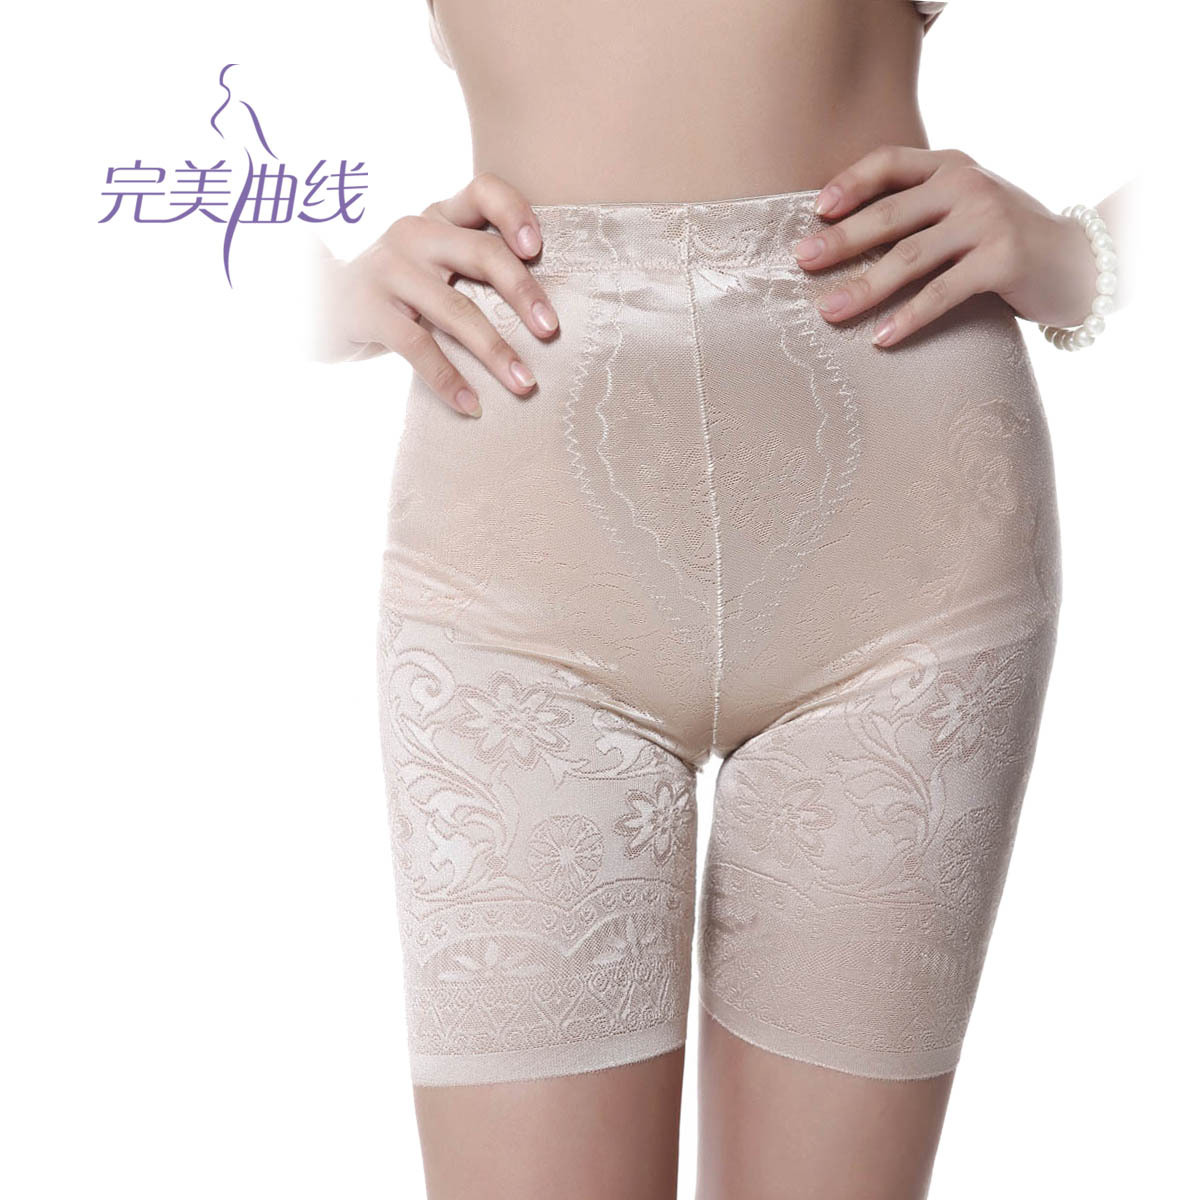 The perfect curve body shaping tight-fitting postpartum shaping pants slimming butt-lifting high waist panties postpartum